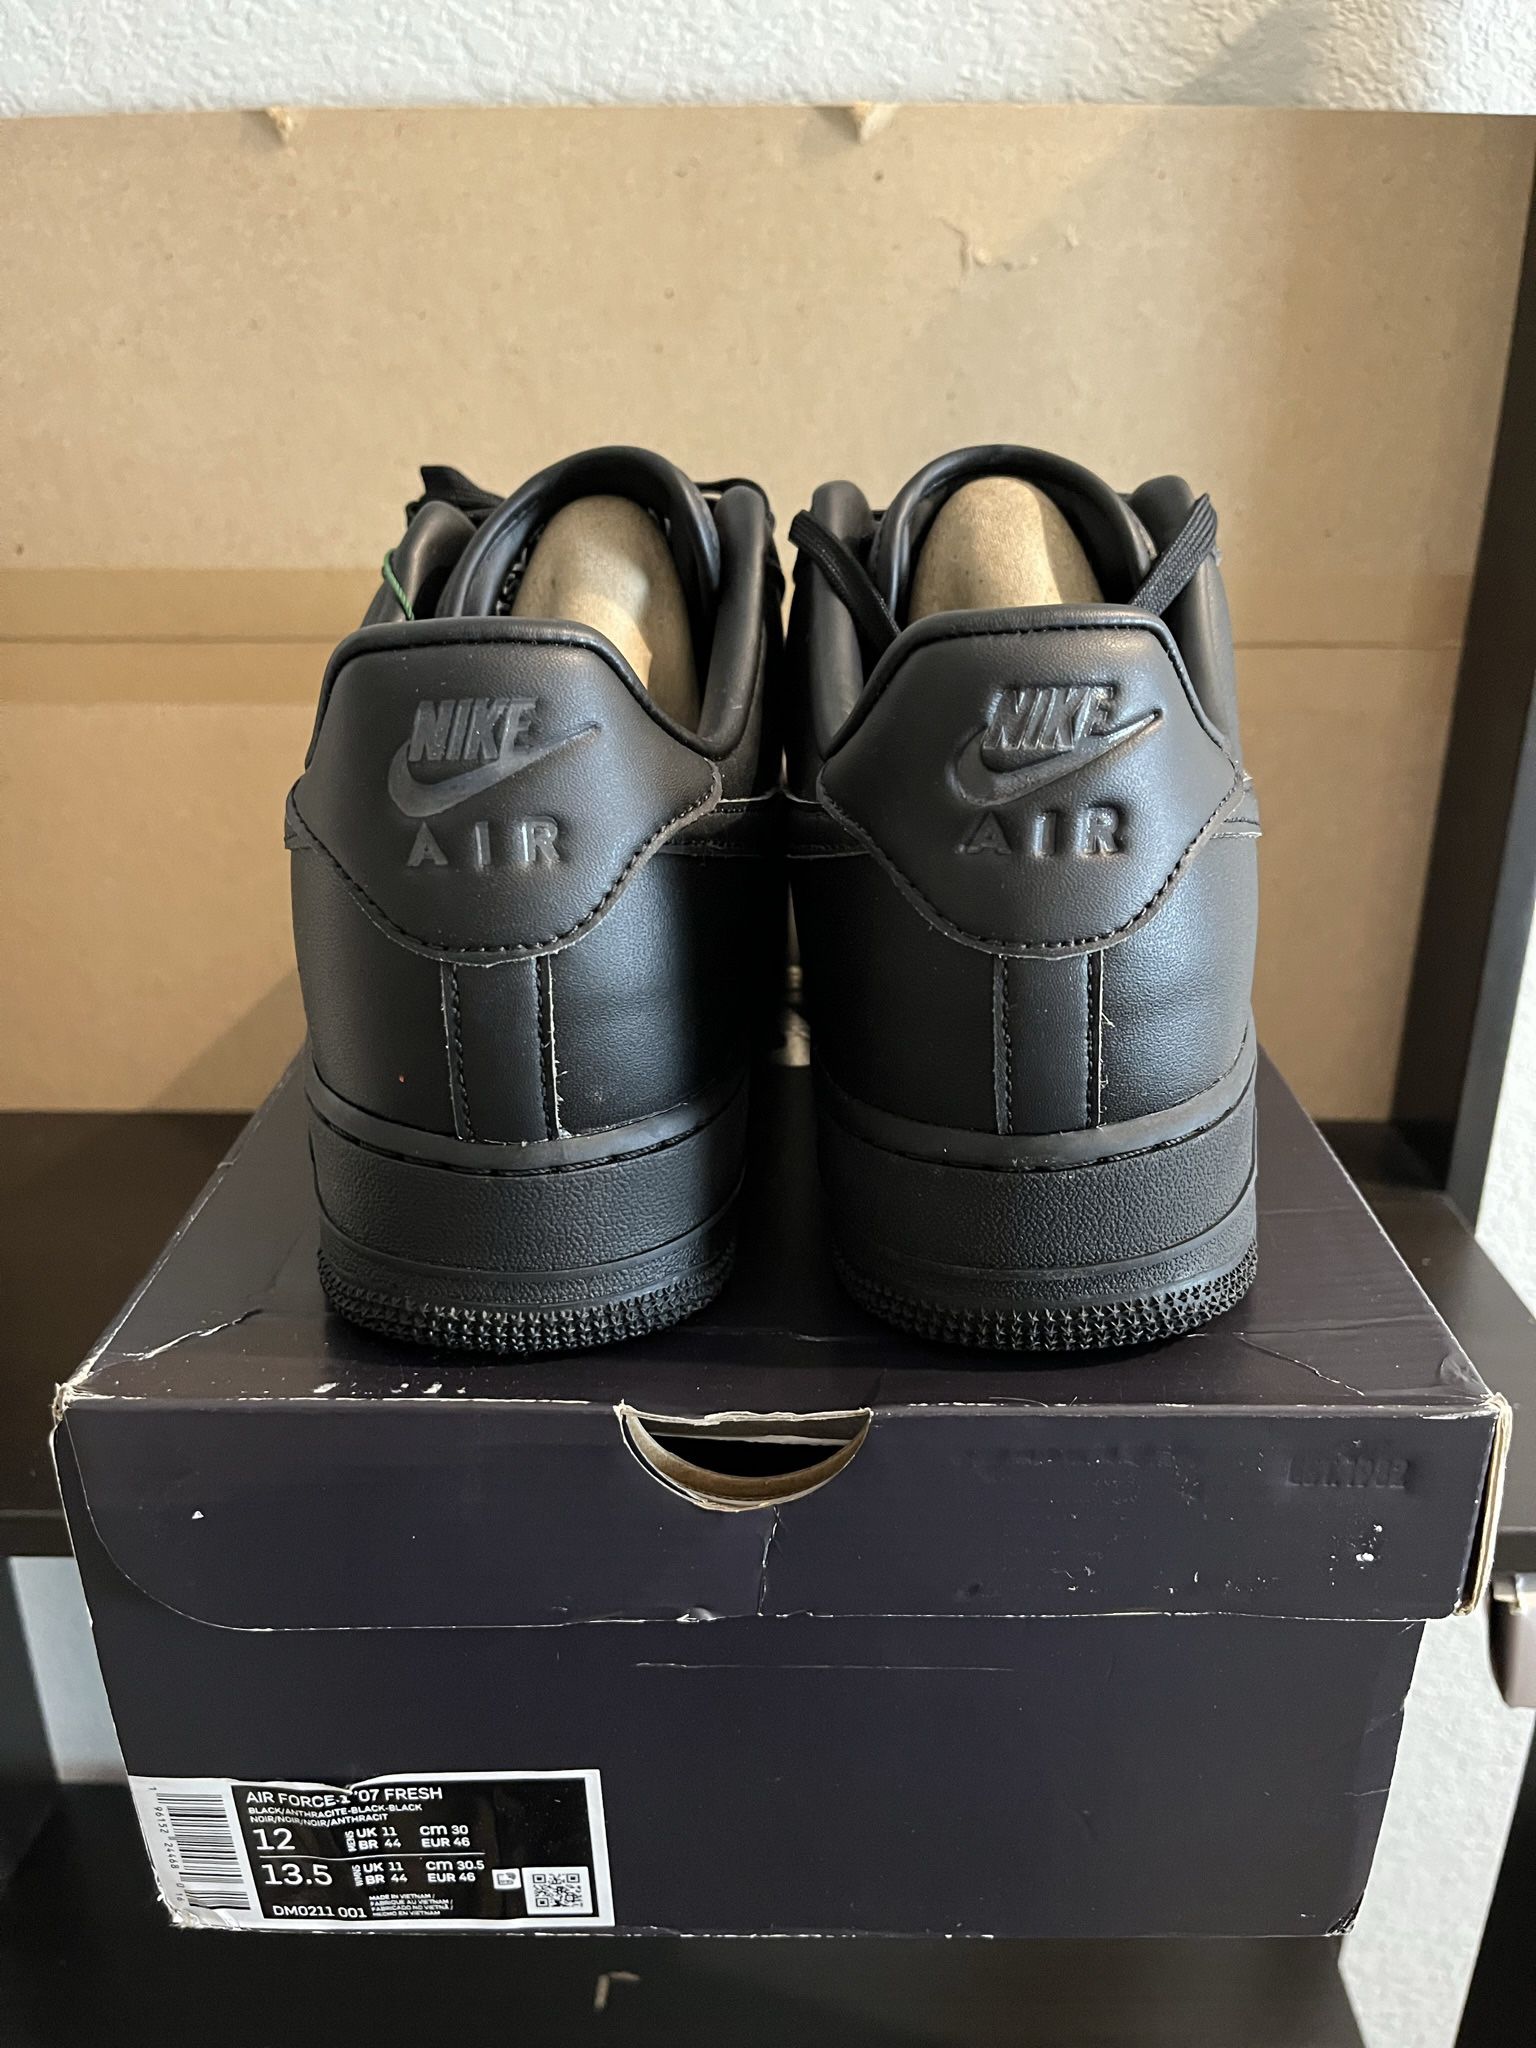 Nike Air Force 1 Black Smoke Grey for Sale in Round Rock, TX - OfferUp